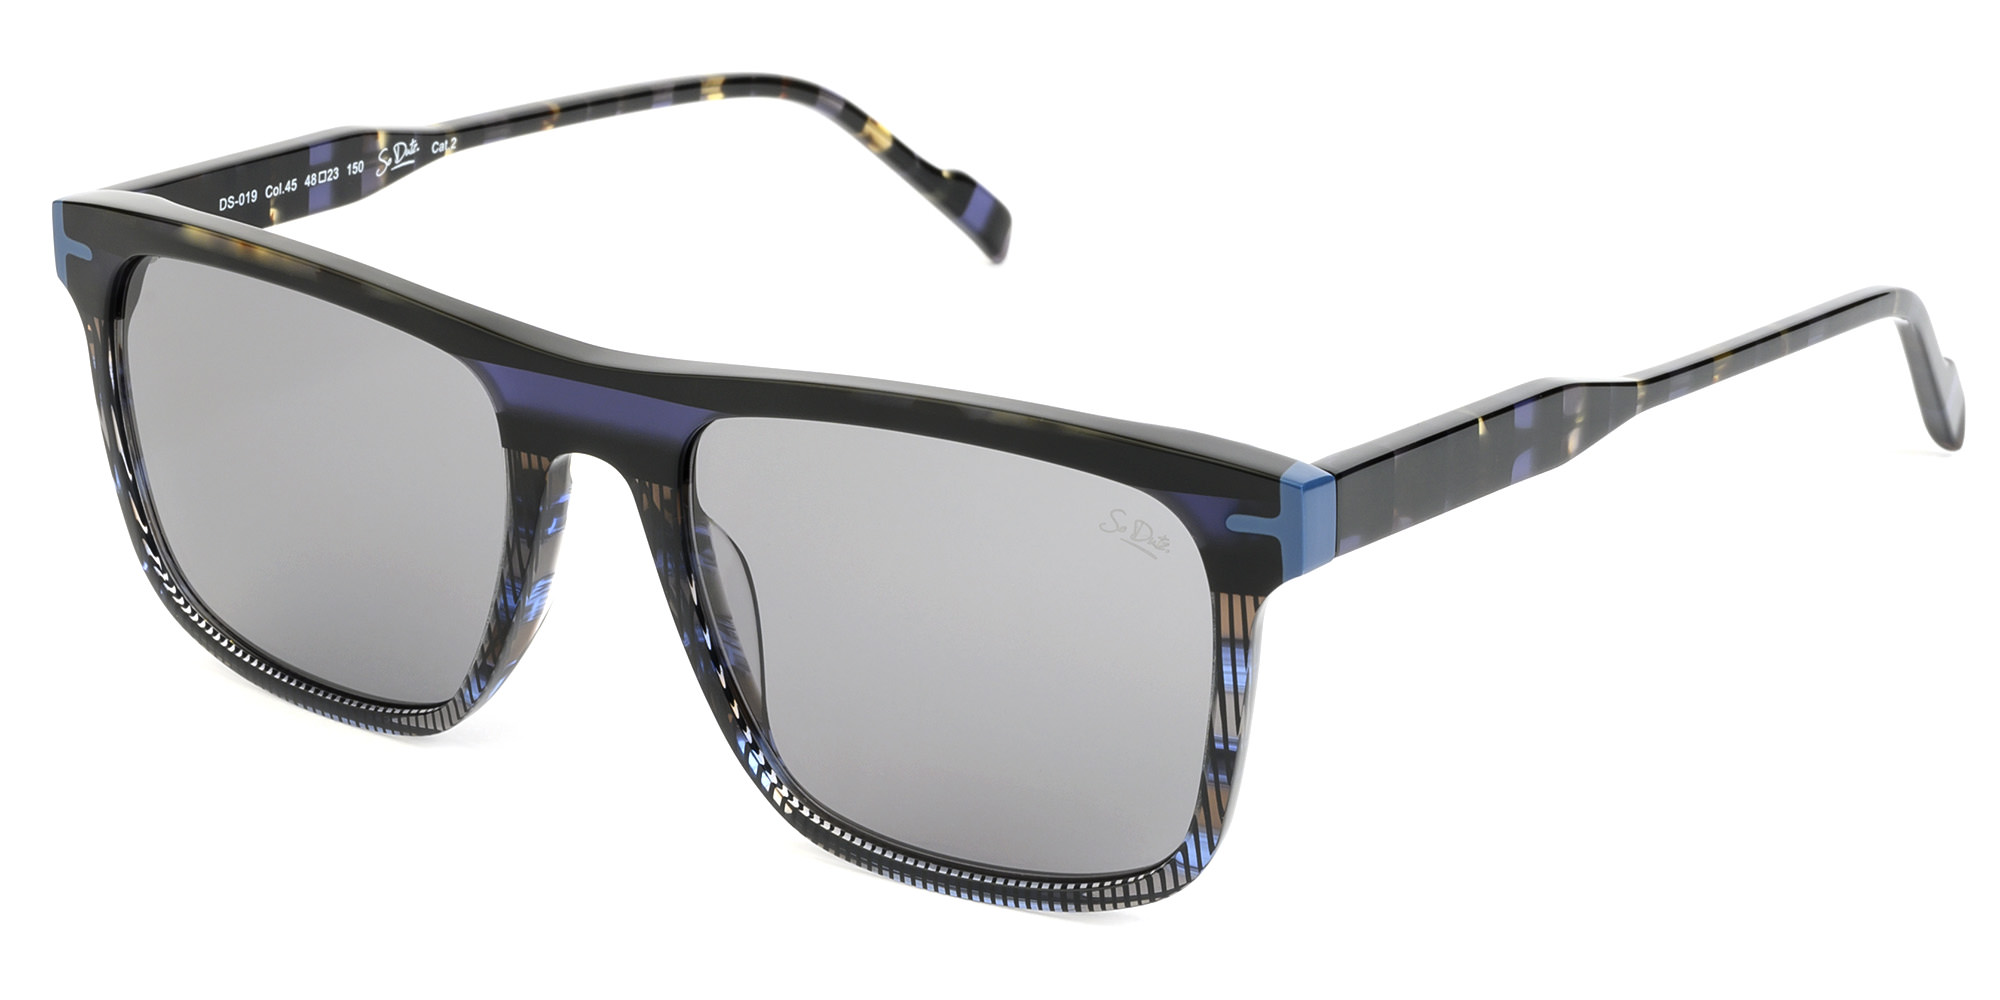 Brown-blue based, multicolored, acetate frame and temples, with matching color nylon lenses